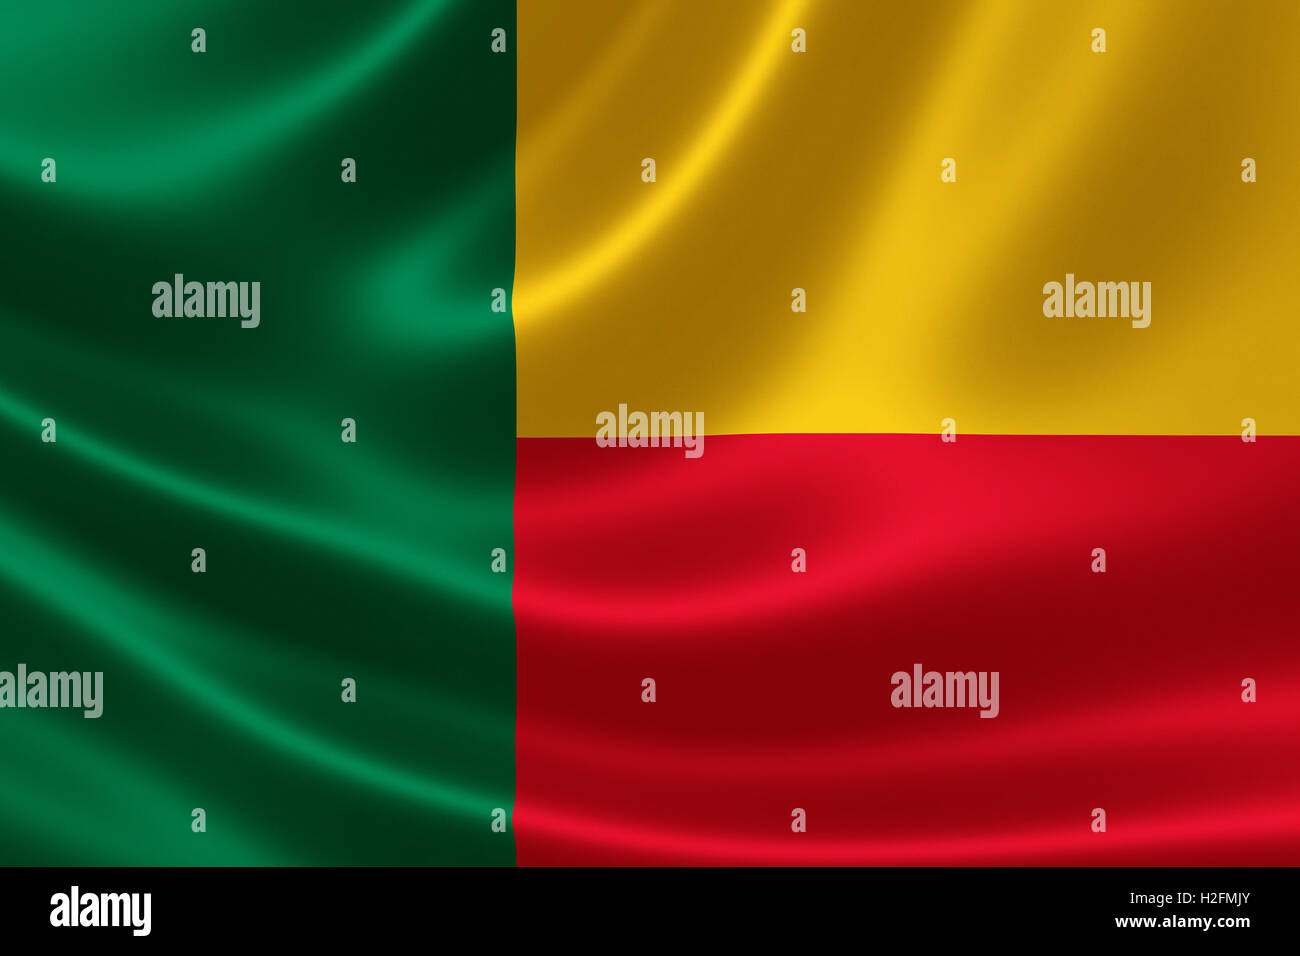 3D rendering of the flag of Benin on satin texture. Benin is a country in West Africa. Stock Photo